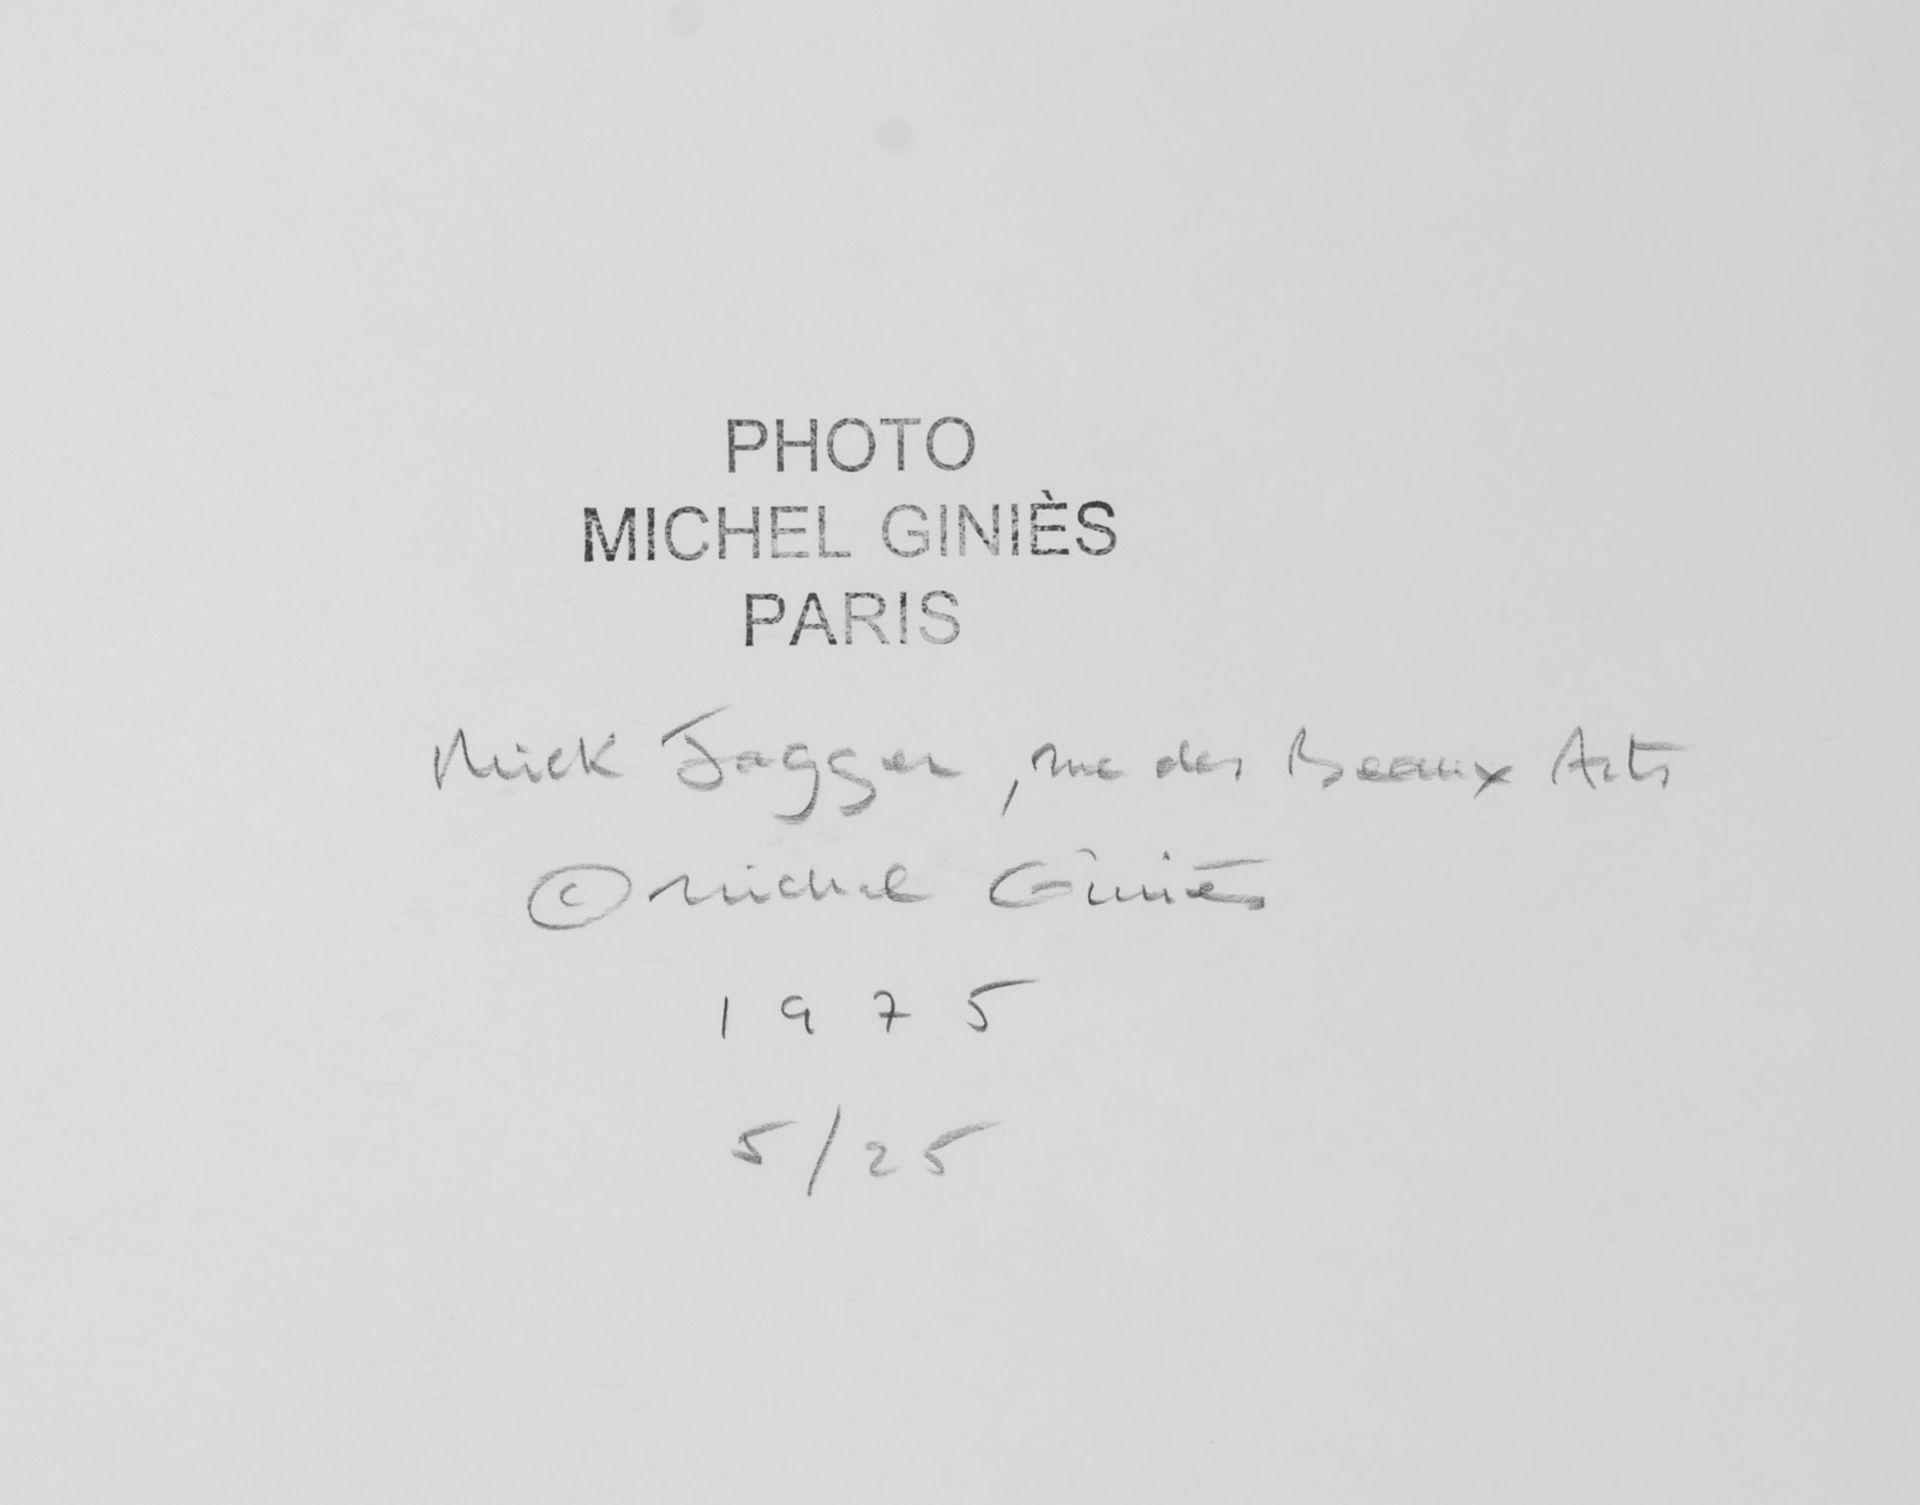 MICHEL GINIES (1952) - Image 2 of 2